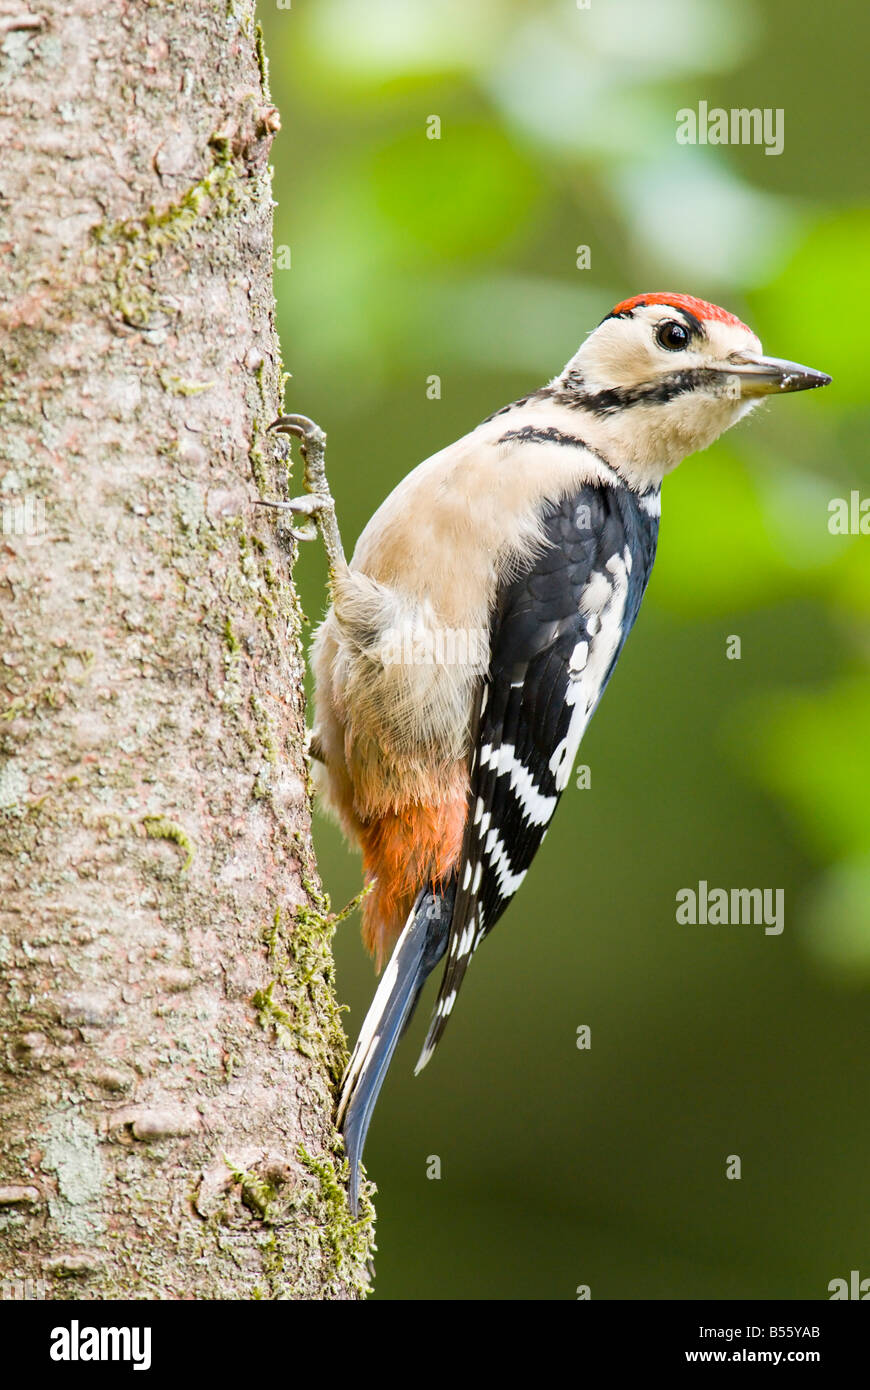 Great spotted woodpecker clinging to tree trunk Stock Photo